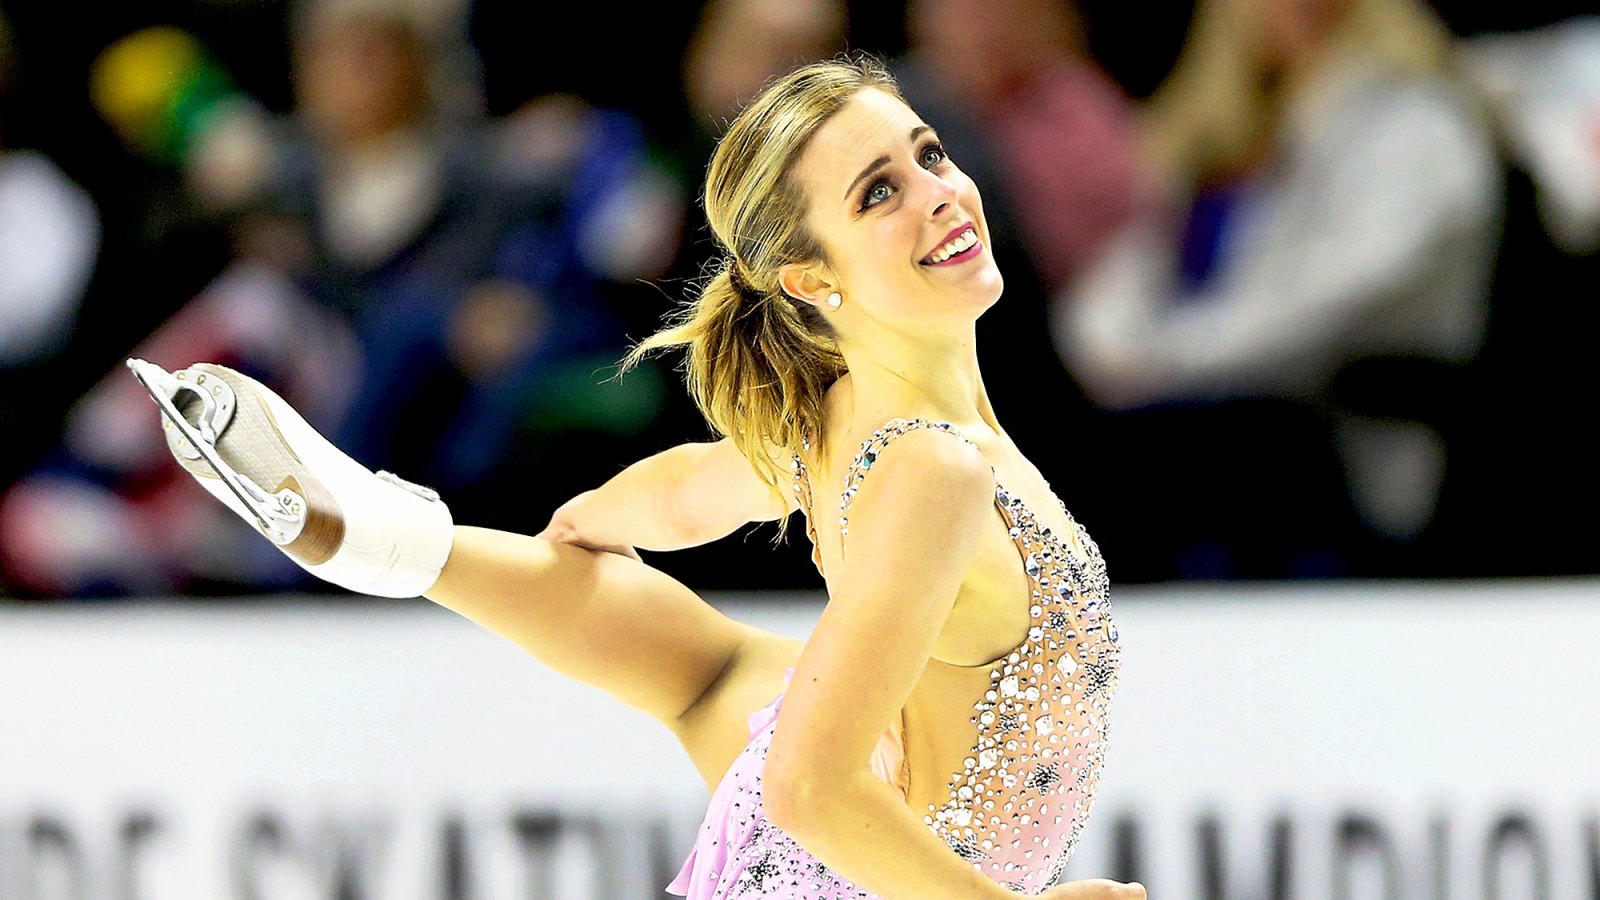 Ashley Wagner competes in the Ladies Free Skate during the 2018 Prudential U.S. Figure Skating Championships at the SAP Center on January 5, 2018 in San Jose, California.